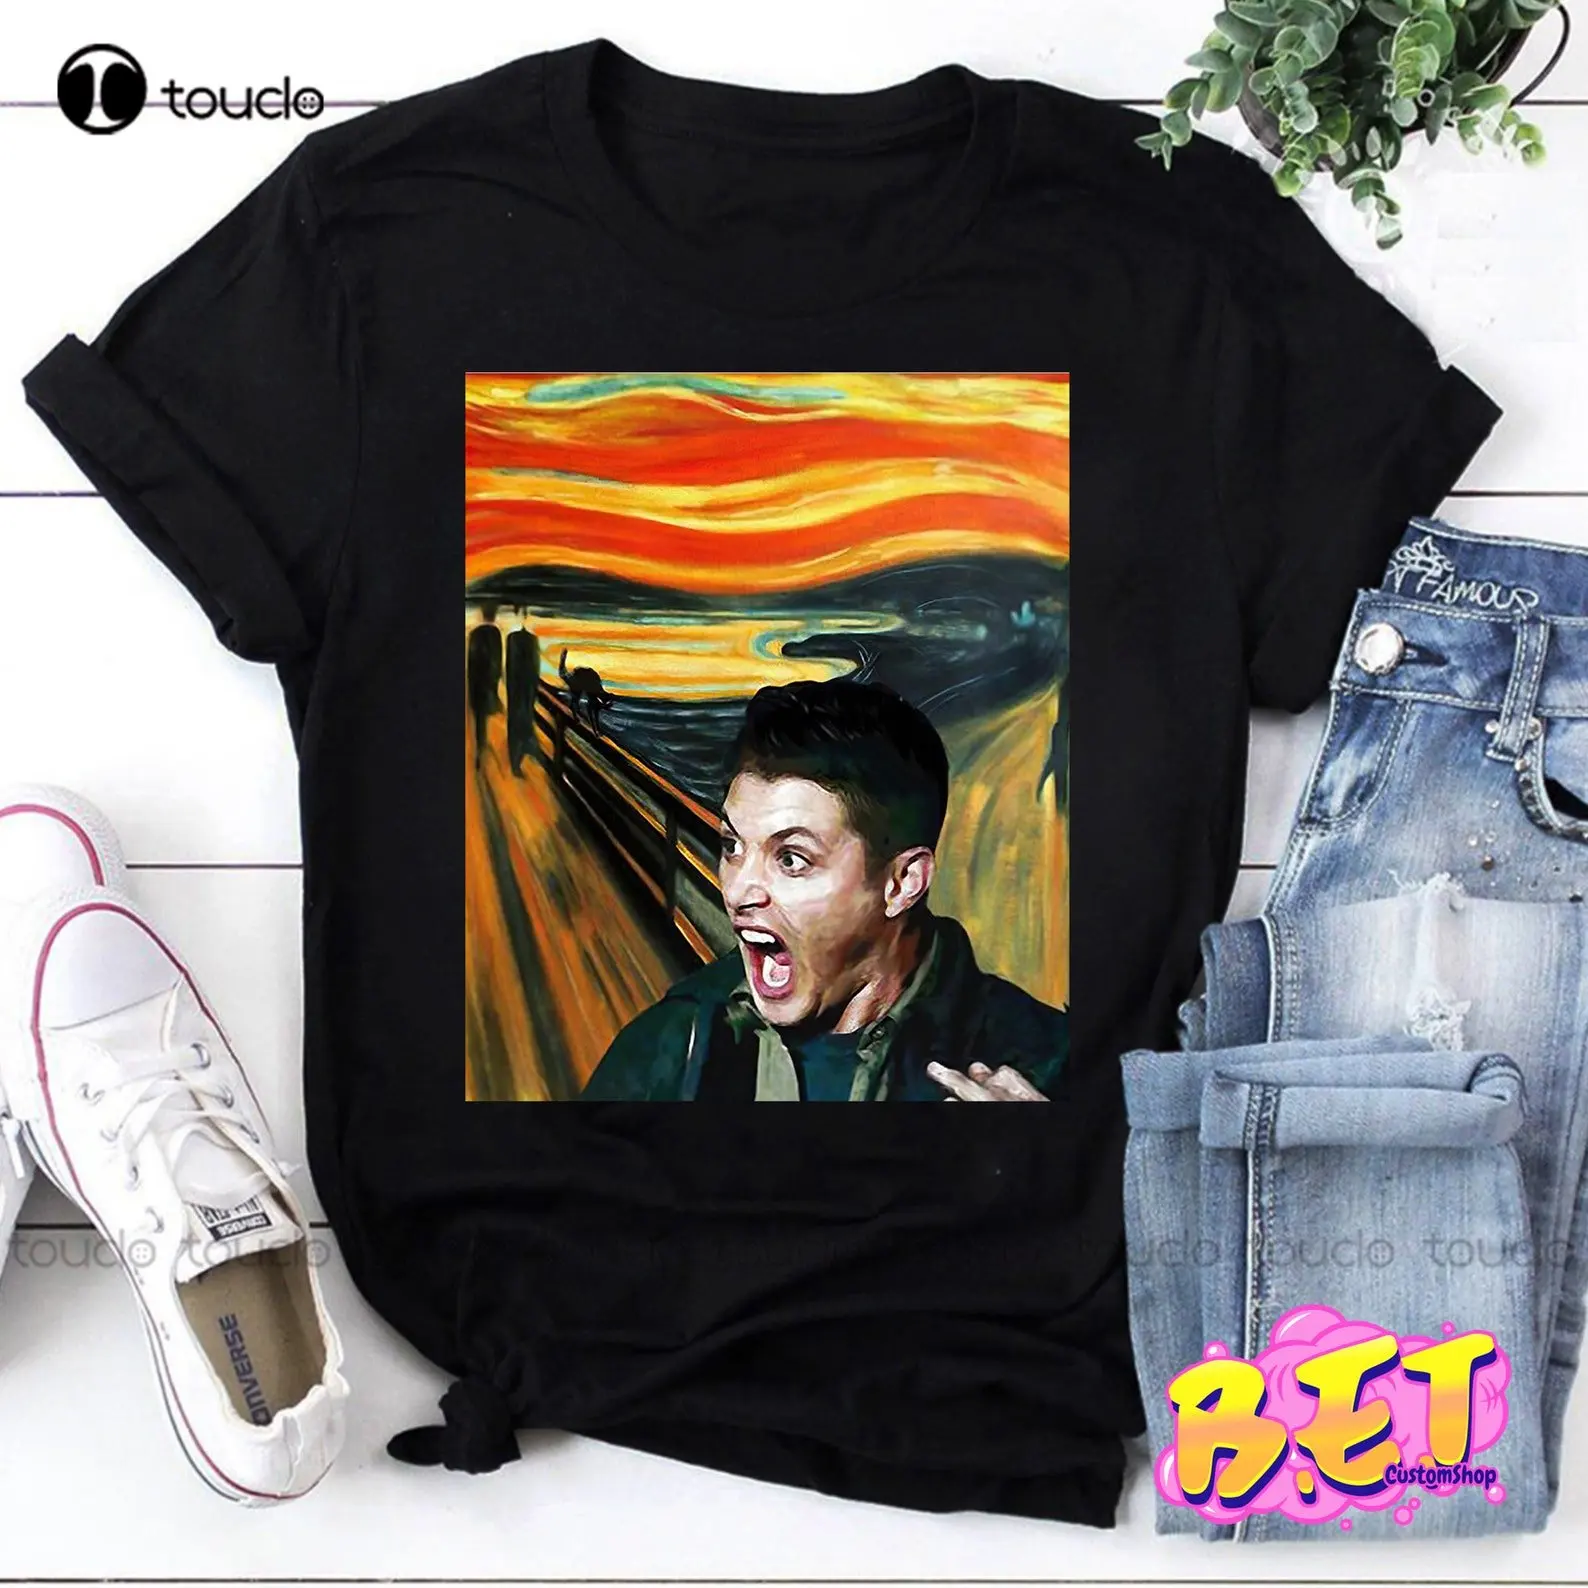 

Dean Winchester Supernatural That Was Scary Funny Vintage Van Gogh T-Shirt, Supernatural Winchesters Shirt Custom Gift Xs-5Xl